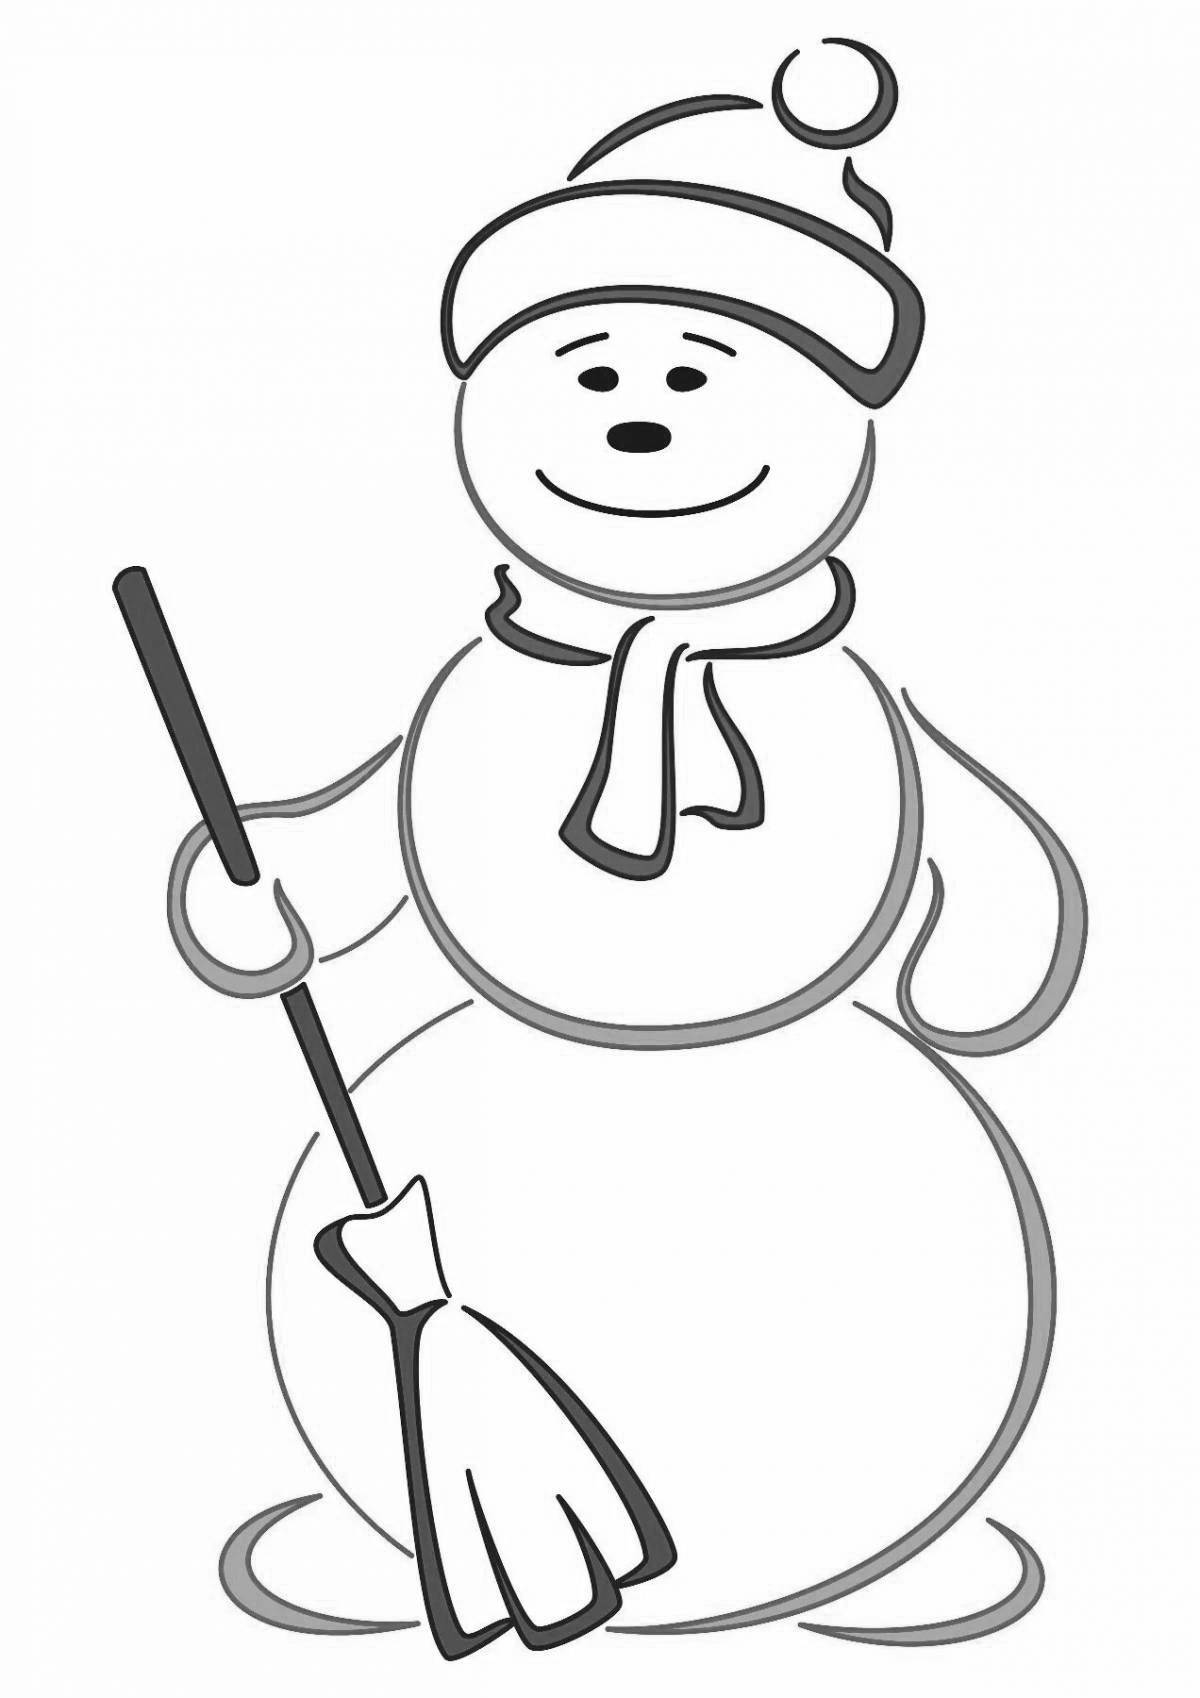 Bright coloring snowman without a nose